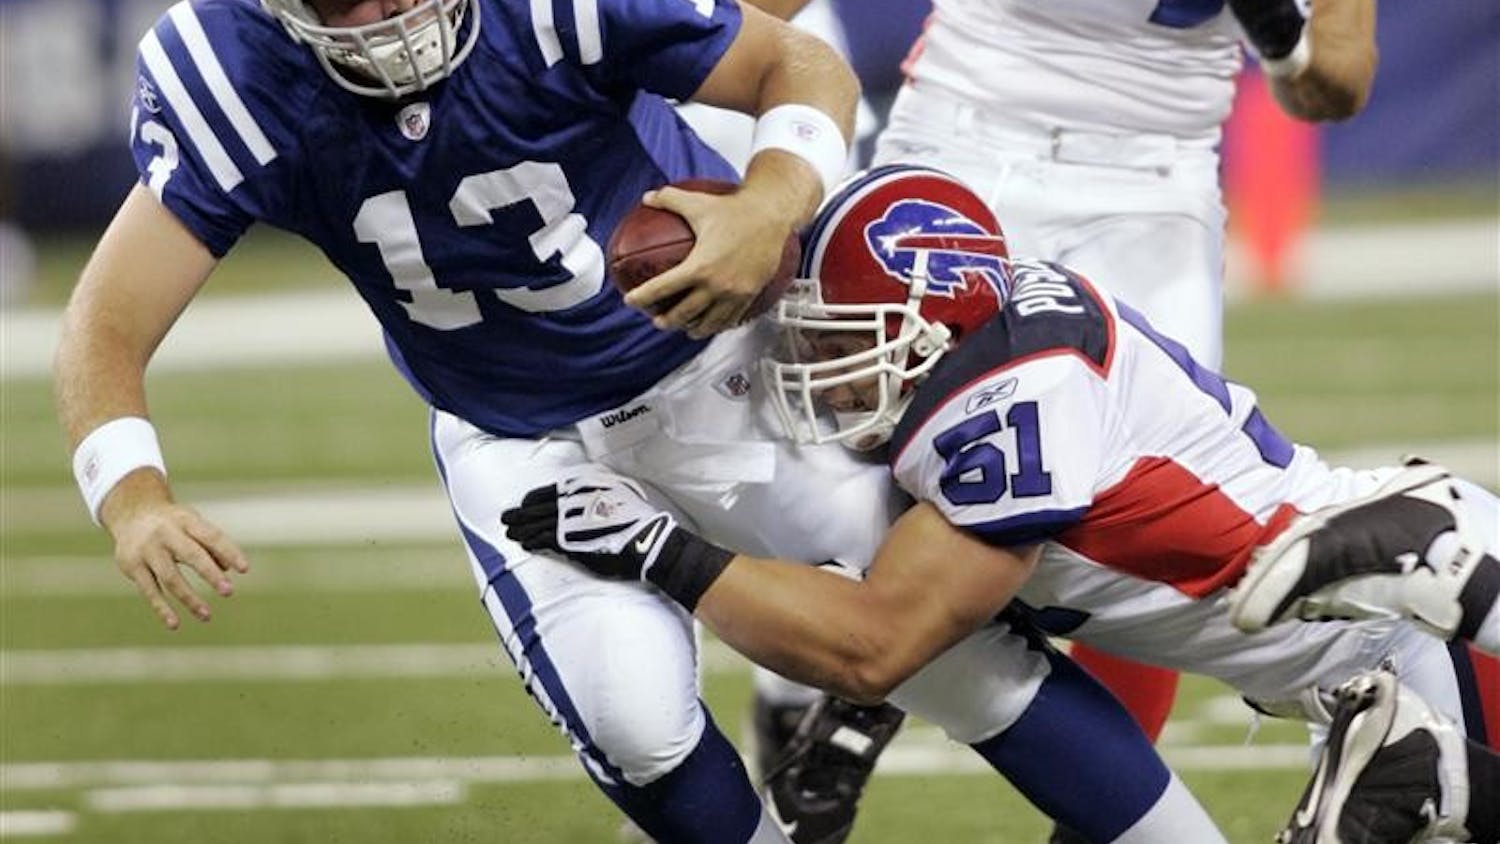 Indianapolis Colts quarterback Jared Lorenzen (13) is tackled by Buffalo Bills linebacker Paul Posluszny (51) during the first quarter of a preseason NFL football game Sunday in Indianapolis. The game is the Colts' first in the new Lucas Oil Stadium.